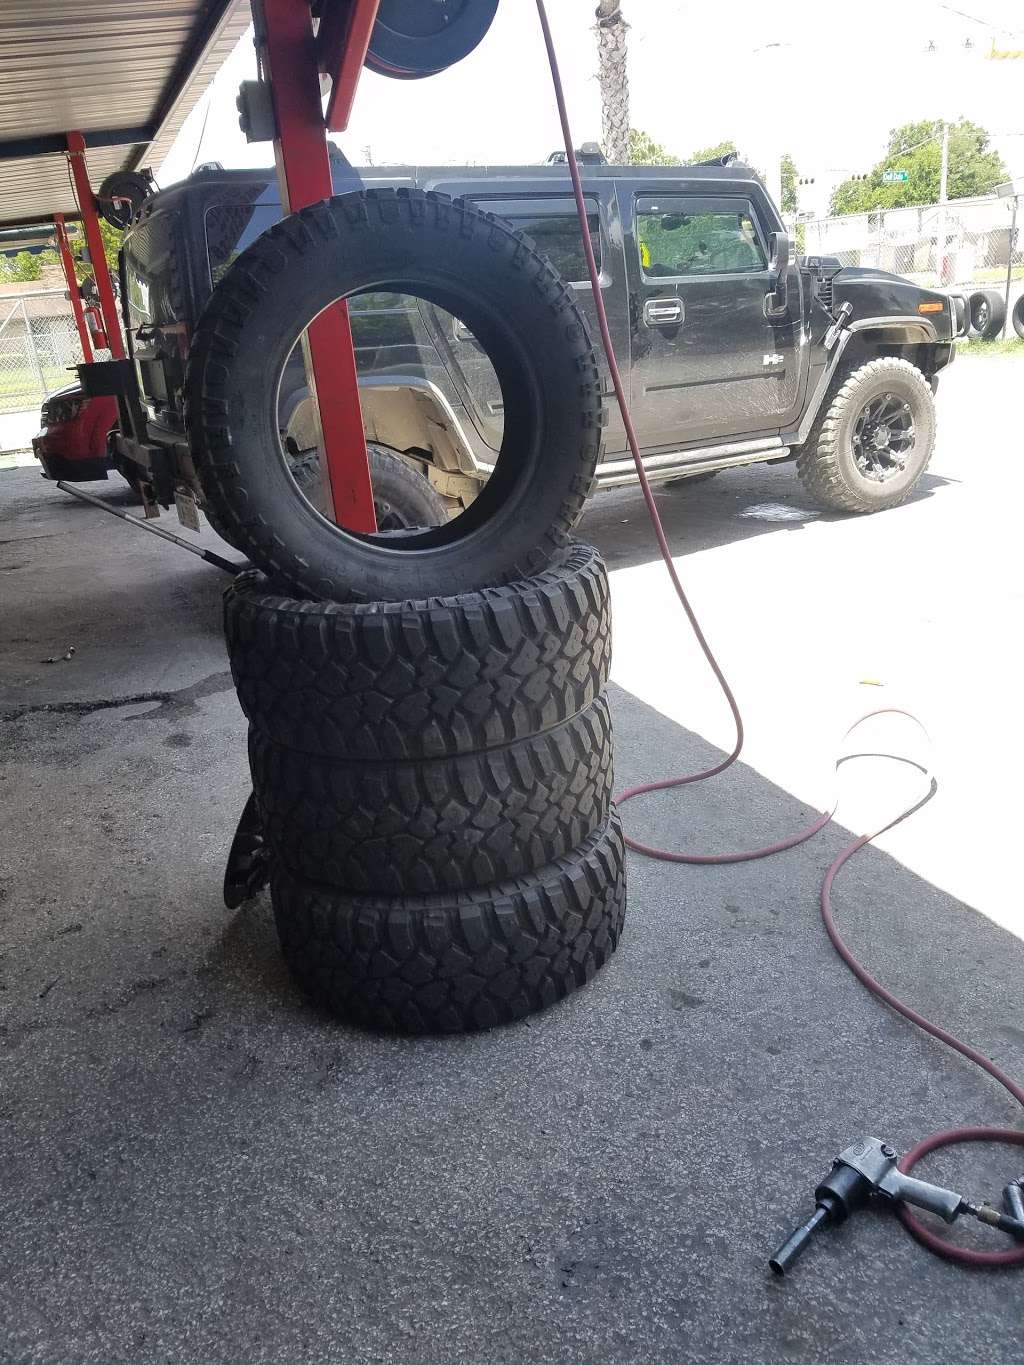 JV Tire Services | 826 Dell Dale St, Channelview, TX 77530, USA | Phone: (832) 573-3714